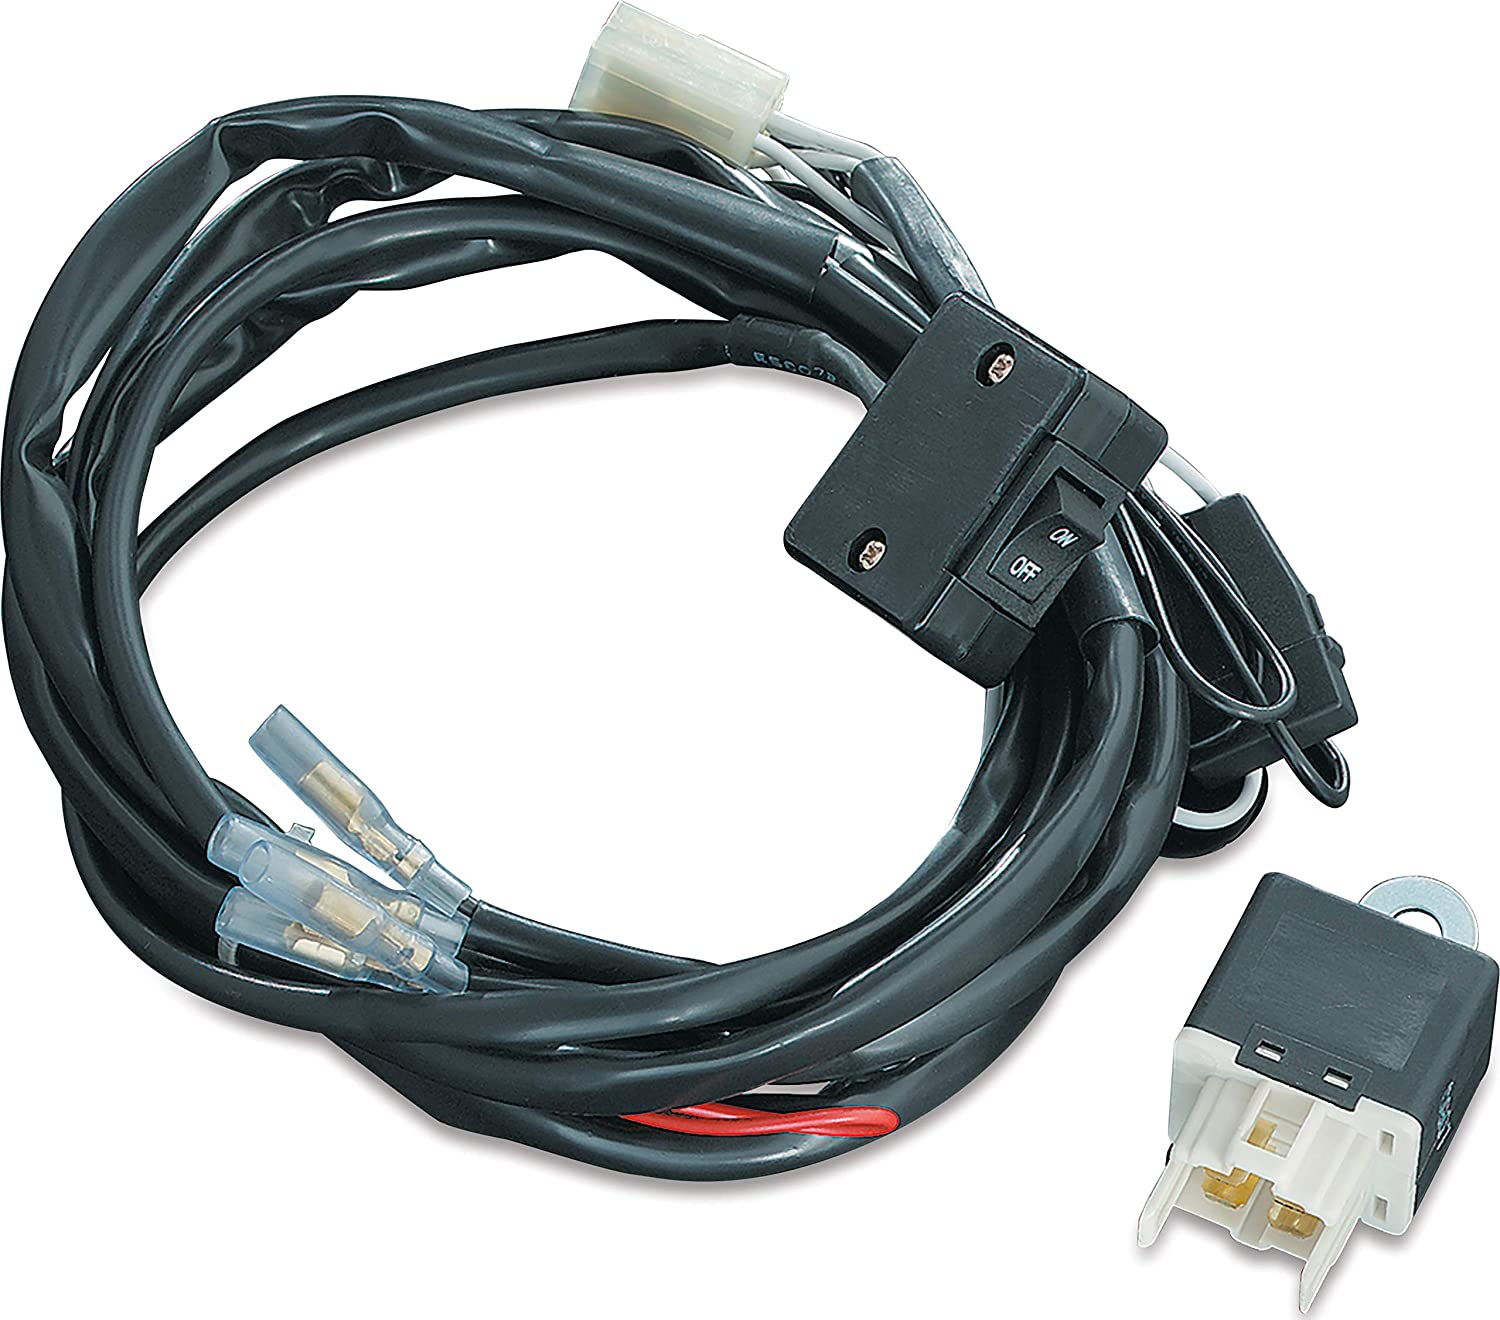 Kuryakyn 2328 Motorcycle Accessory: Wiring and Relay Kit with Rocker Switch, Universal Fit for 12V Applications